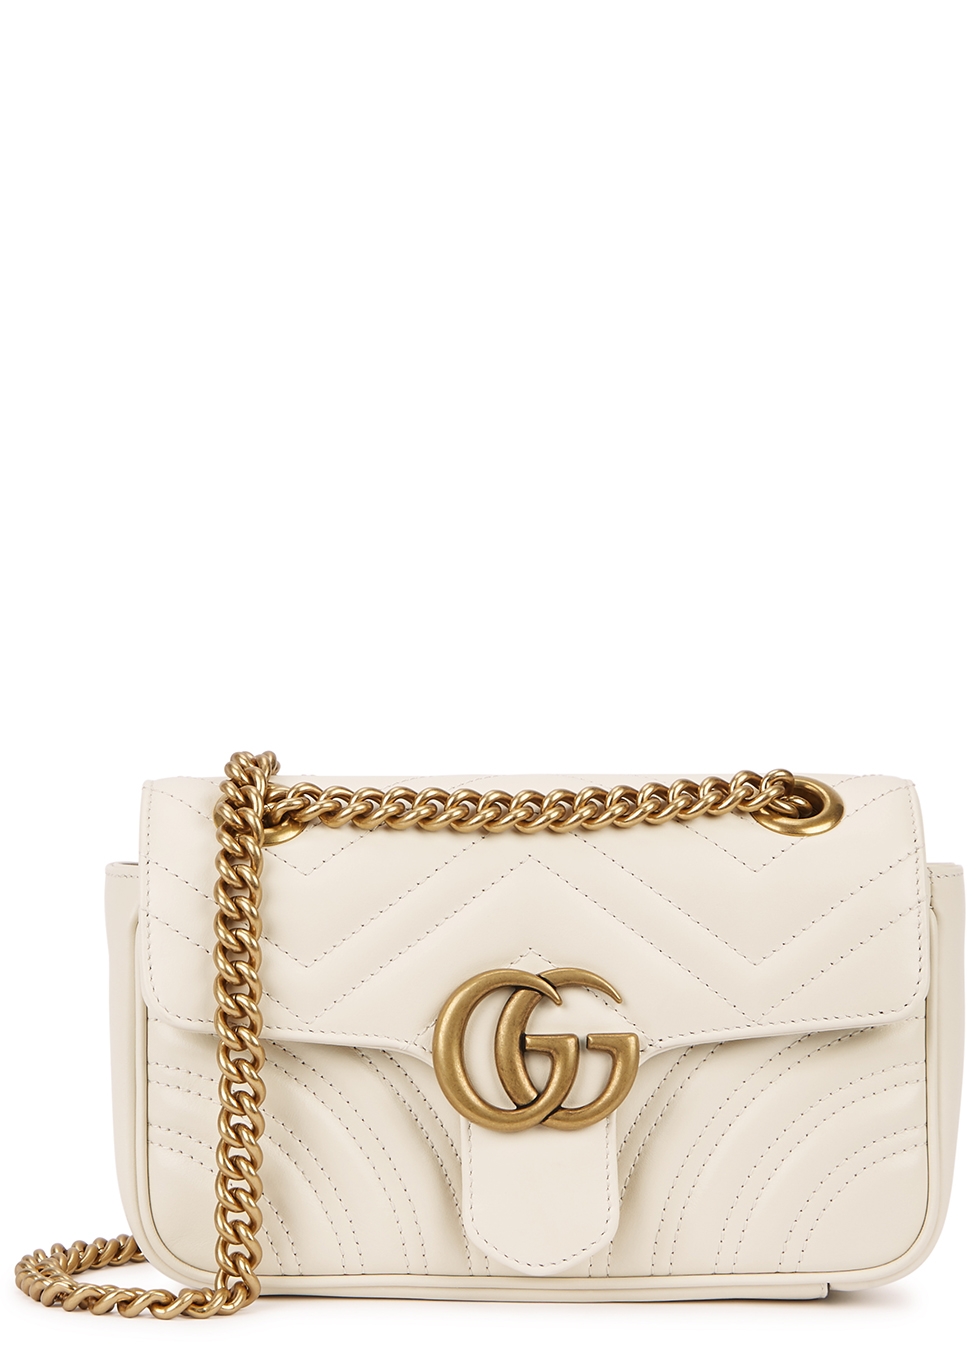 Gucci GG Marmont mini ivory leather 